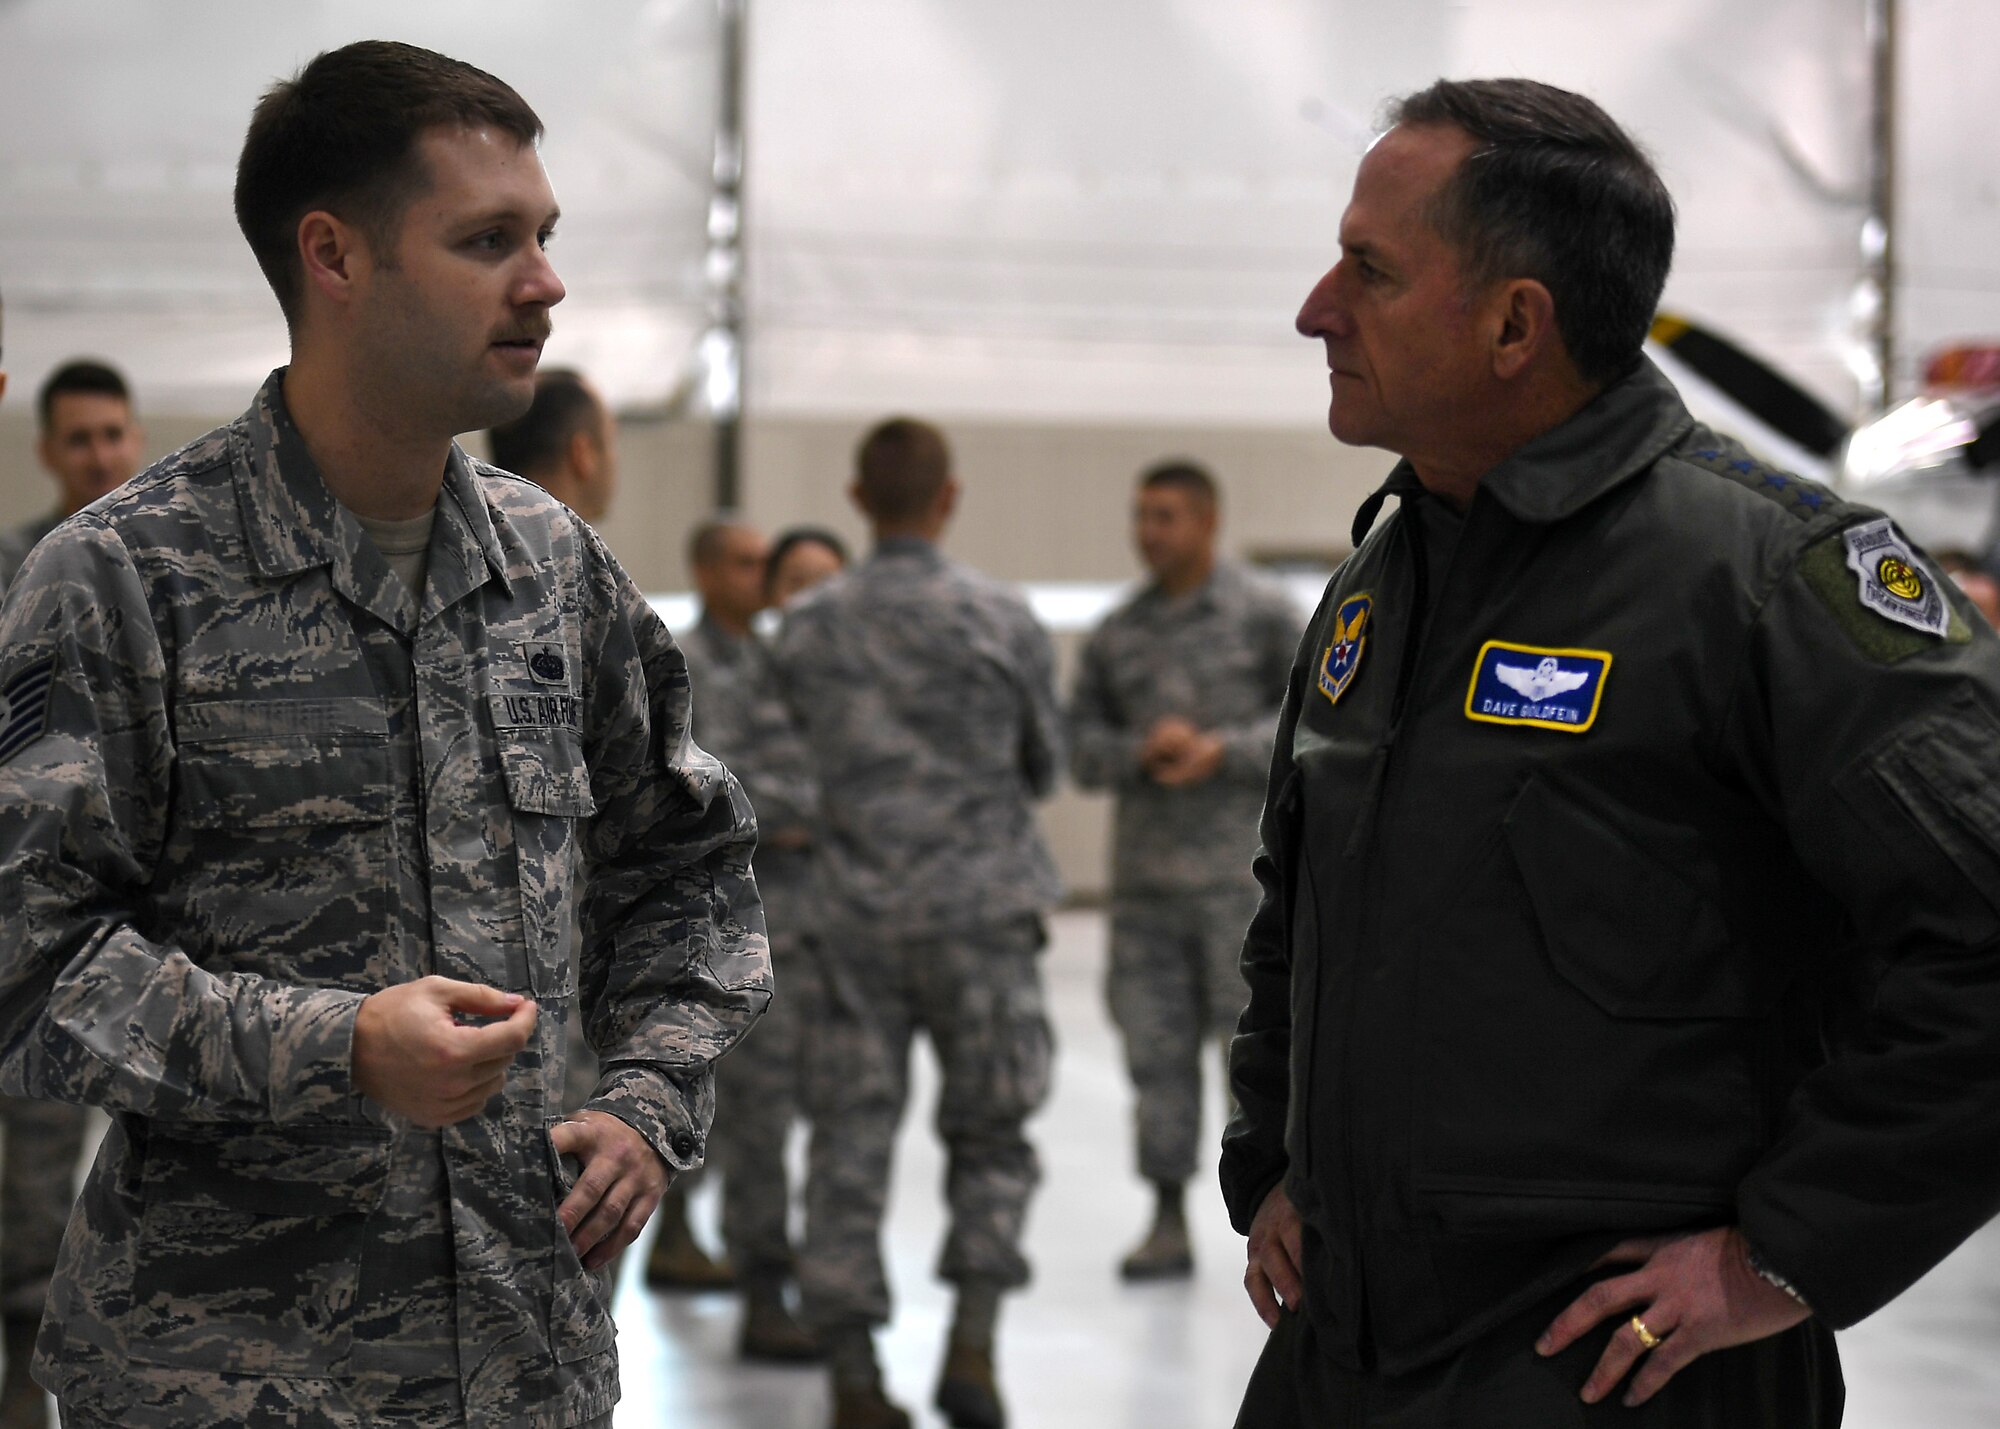 Air Force Chief of Staff Gen. David L. Goldfein speaks to Tech. Sgt. Stephen, 432nd Aircraft Communications Maintenance Squadron, mission defense team lead, about a new Remotely Piloted Aircraft initiative during his visit to Creech Air Force Base, Nev., Jan. 9, 2018. Goldfein visited the Airmen of the 432nd Wing/432nd Air Expeditionary Wing to view RPA operations firsthand and to discuss the future of the enterprise. (U.S. Air Force photo/Master Sgt. Nadine Barclay)